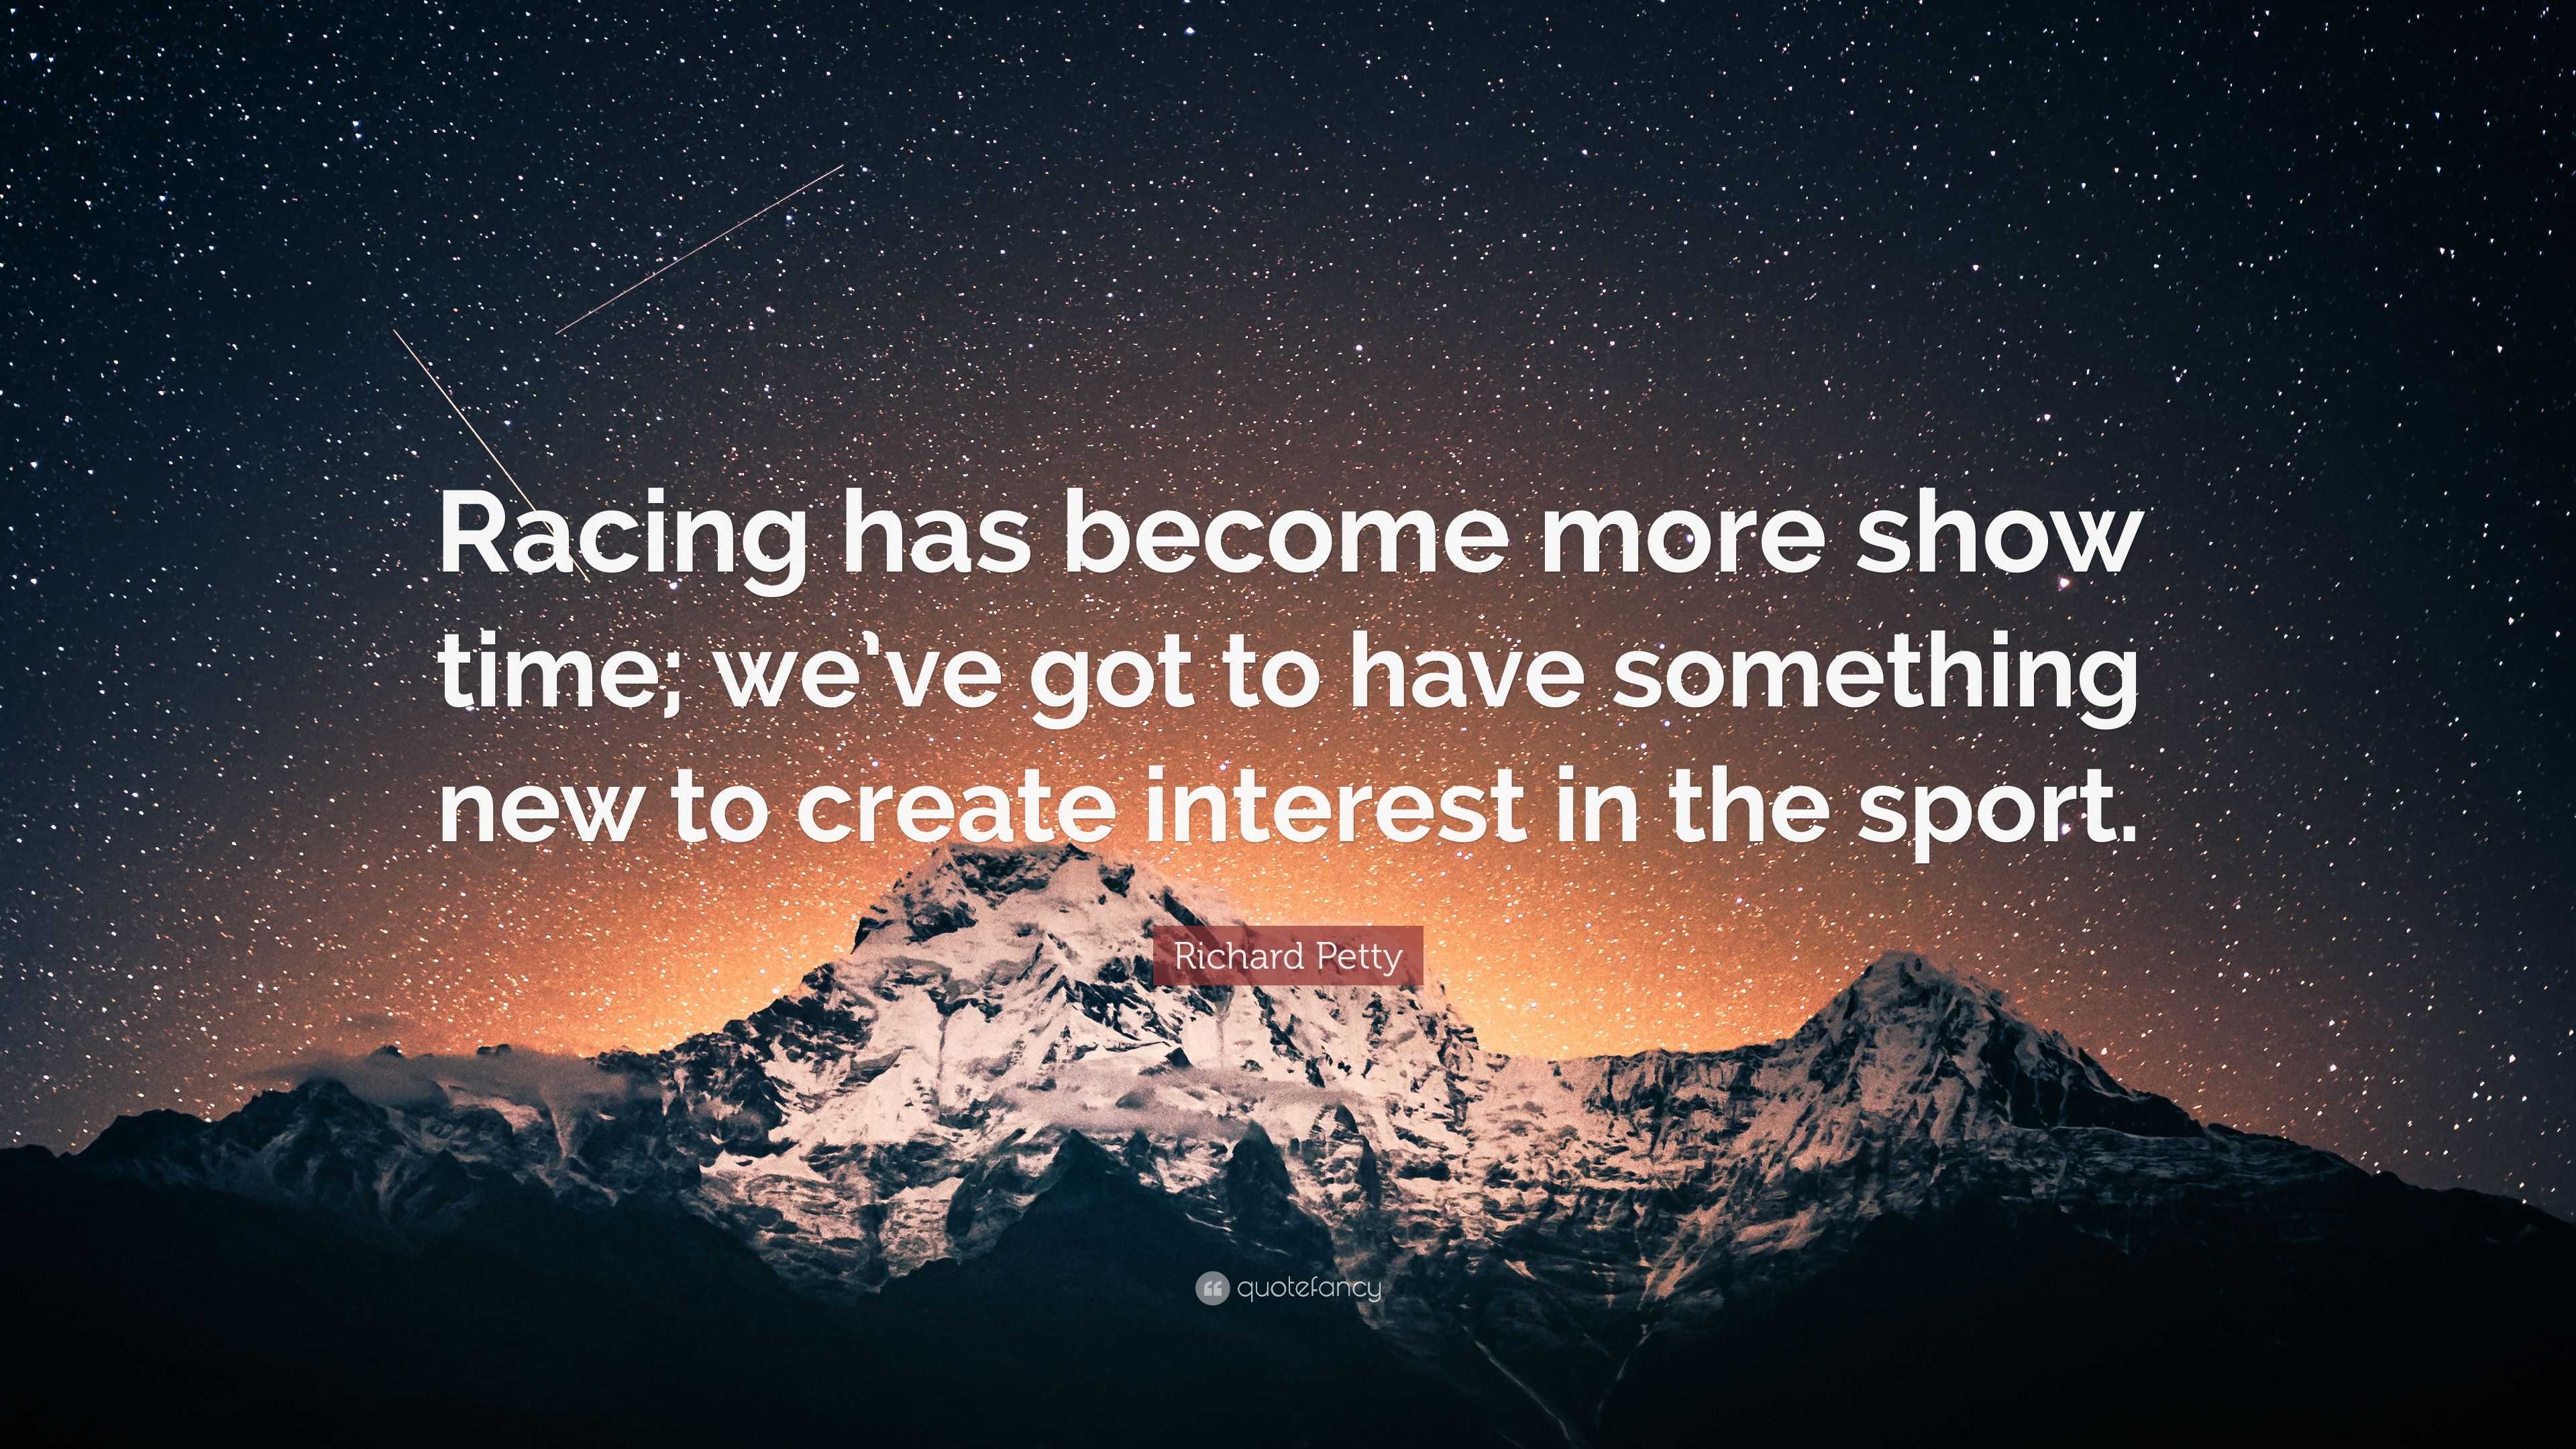 Richard Petty Quote: “Racing has become more show time; we’ve got to ...